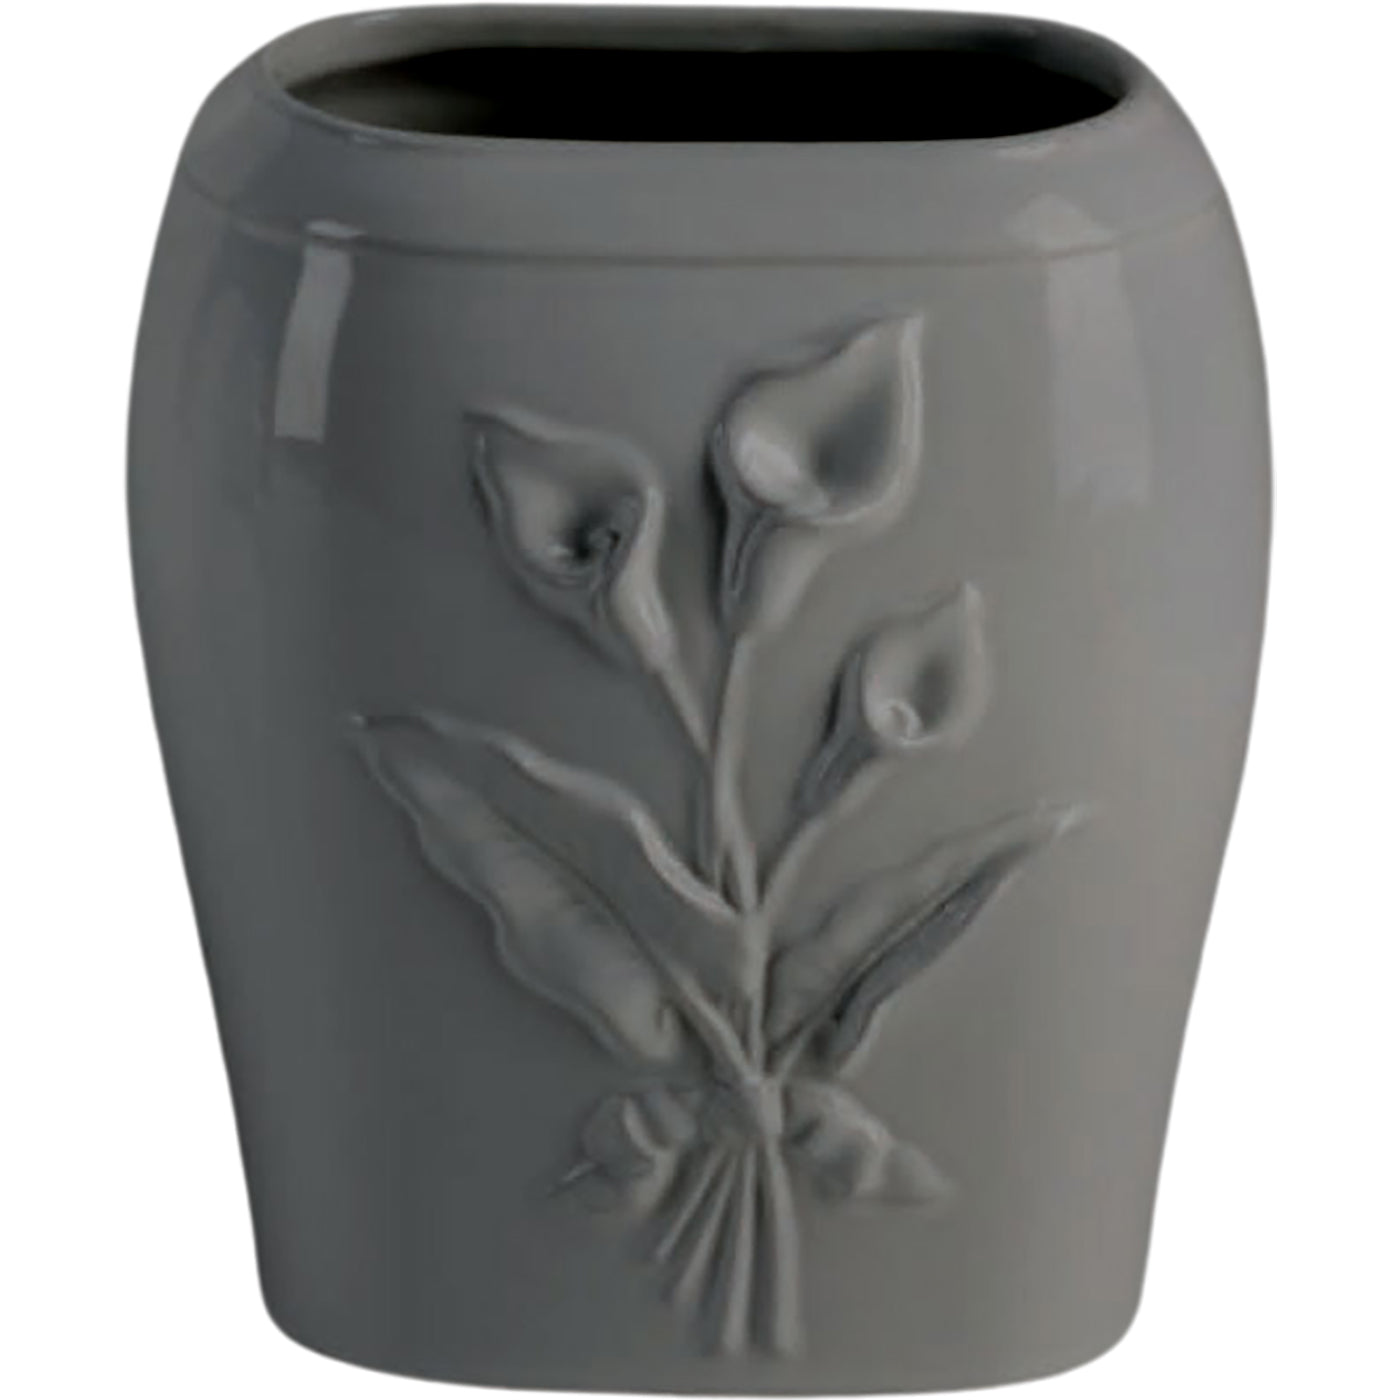 Rectangular grave vase Calla gray 19x17cm - 7.5x6.7in In gray porcelain, wall attached CAL160P/G